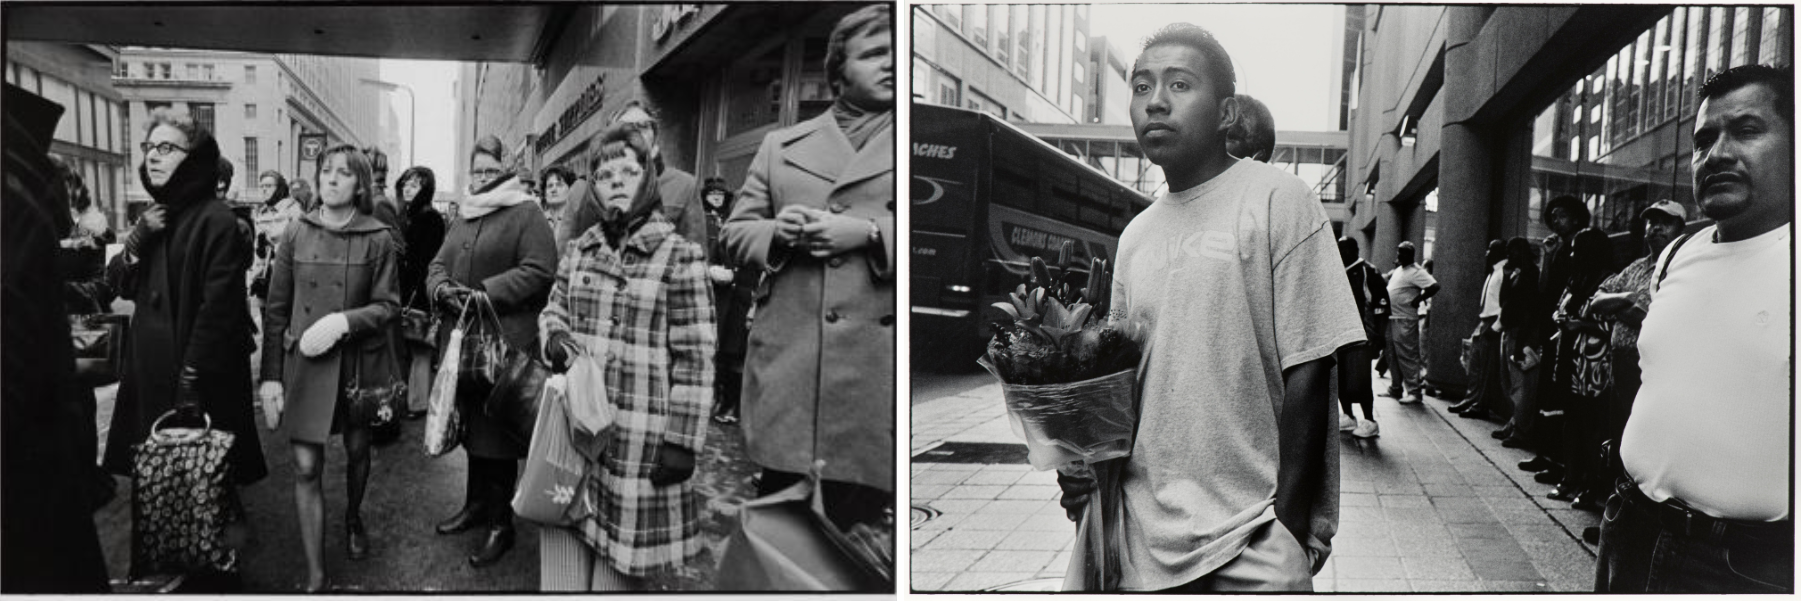 Two black and white bus stop scenes. At left, a crowd of people from the 1970s peer down the street, looking for their bus. They are dressed in winter coats and period clothing. At right, a young man with medium dark skin is in the foreground, dressed in a white t-shirt and carrying a bouquet of flowers. He's at a bus stop, with other waiting passengers, waiting for his bus to arrive.